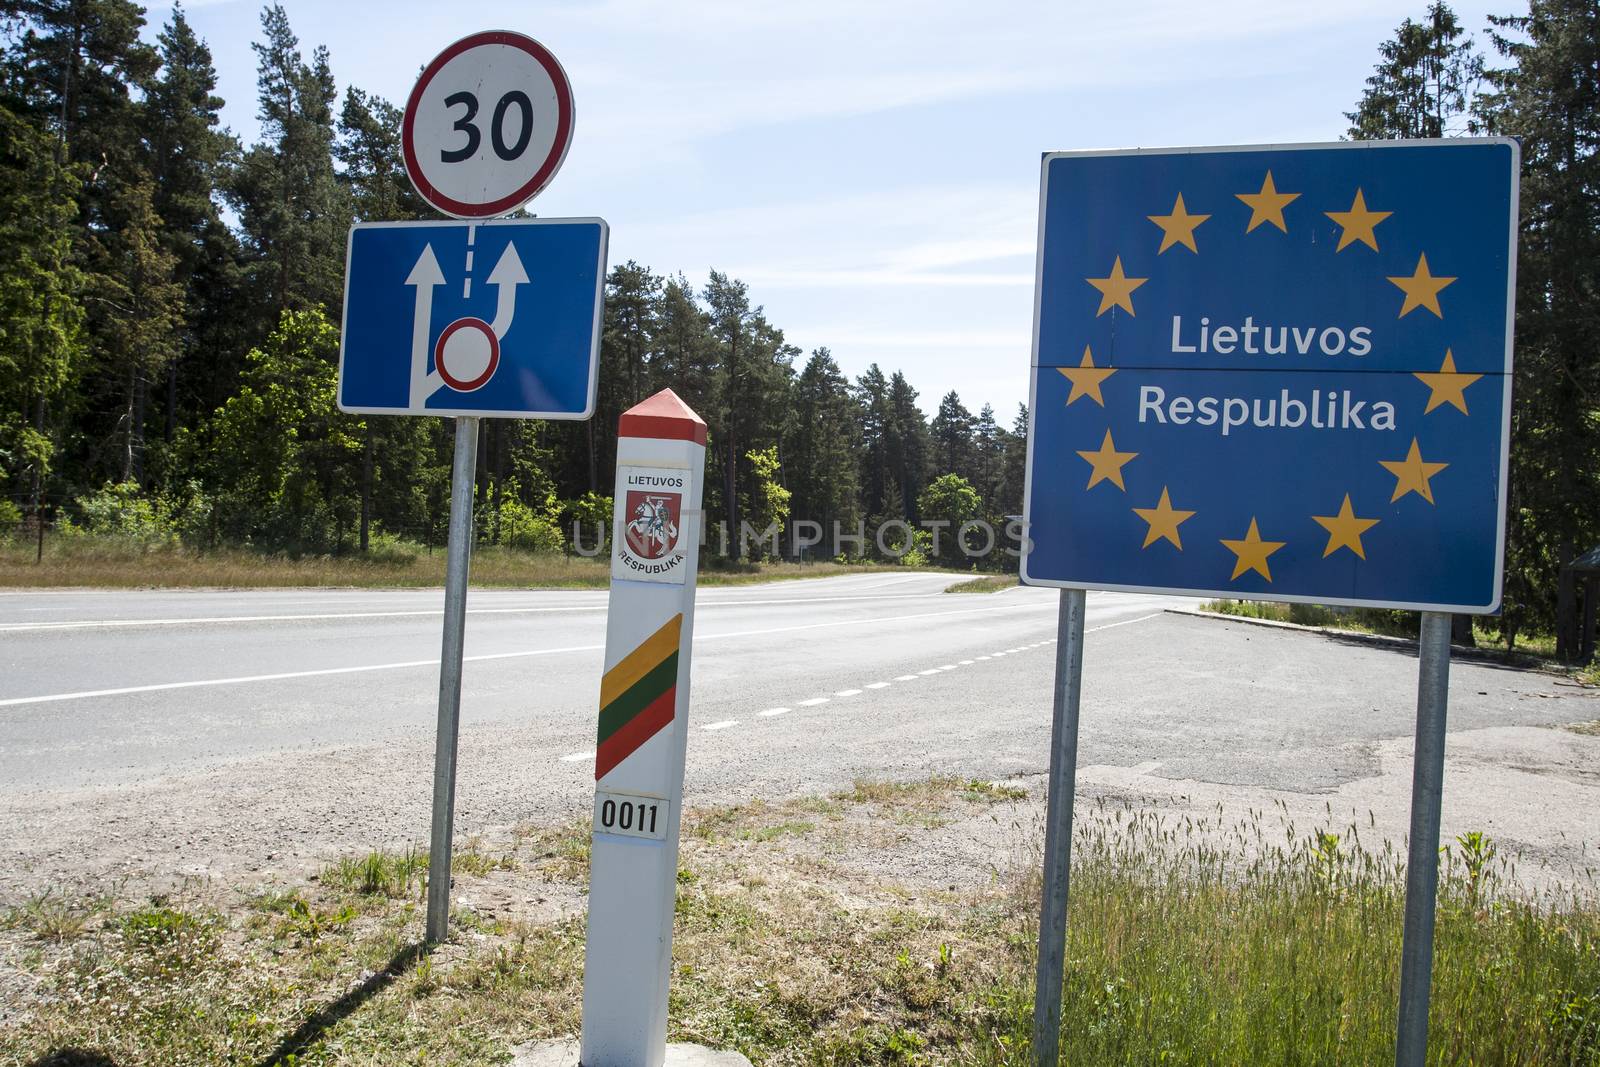 Lithuania country border sign between Latvia and Lithuania with coat of arms and flag.